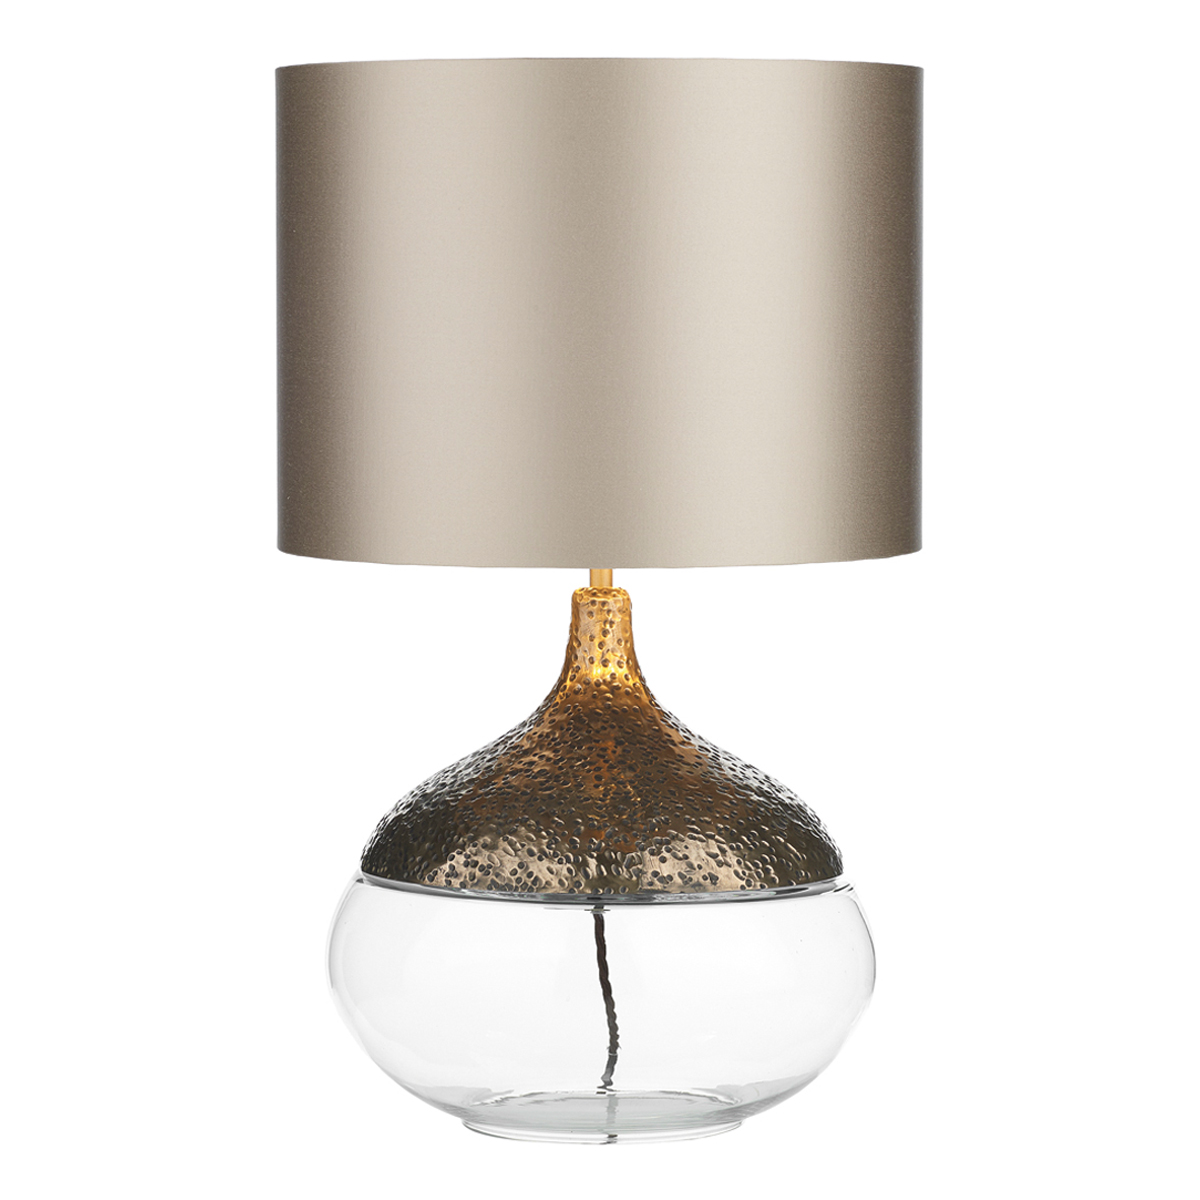 Teardrop Table Lamp Pewter Base Only, Pewter Table Lamps Uk